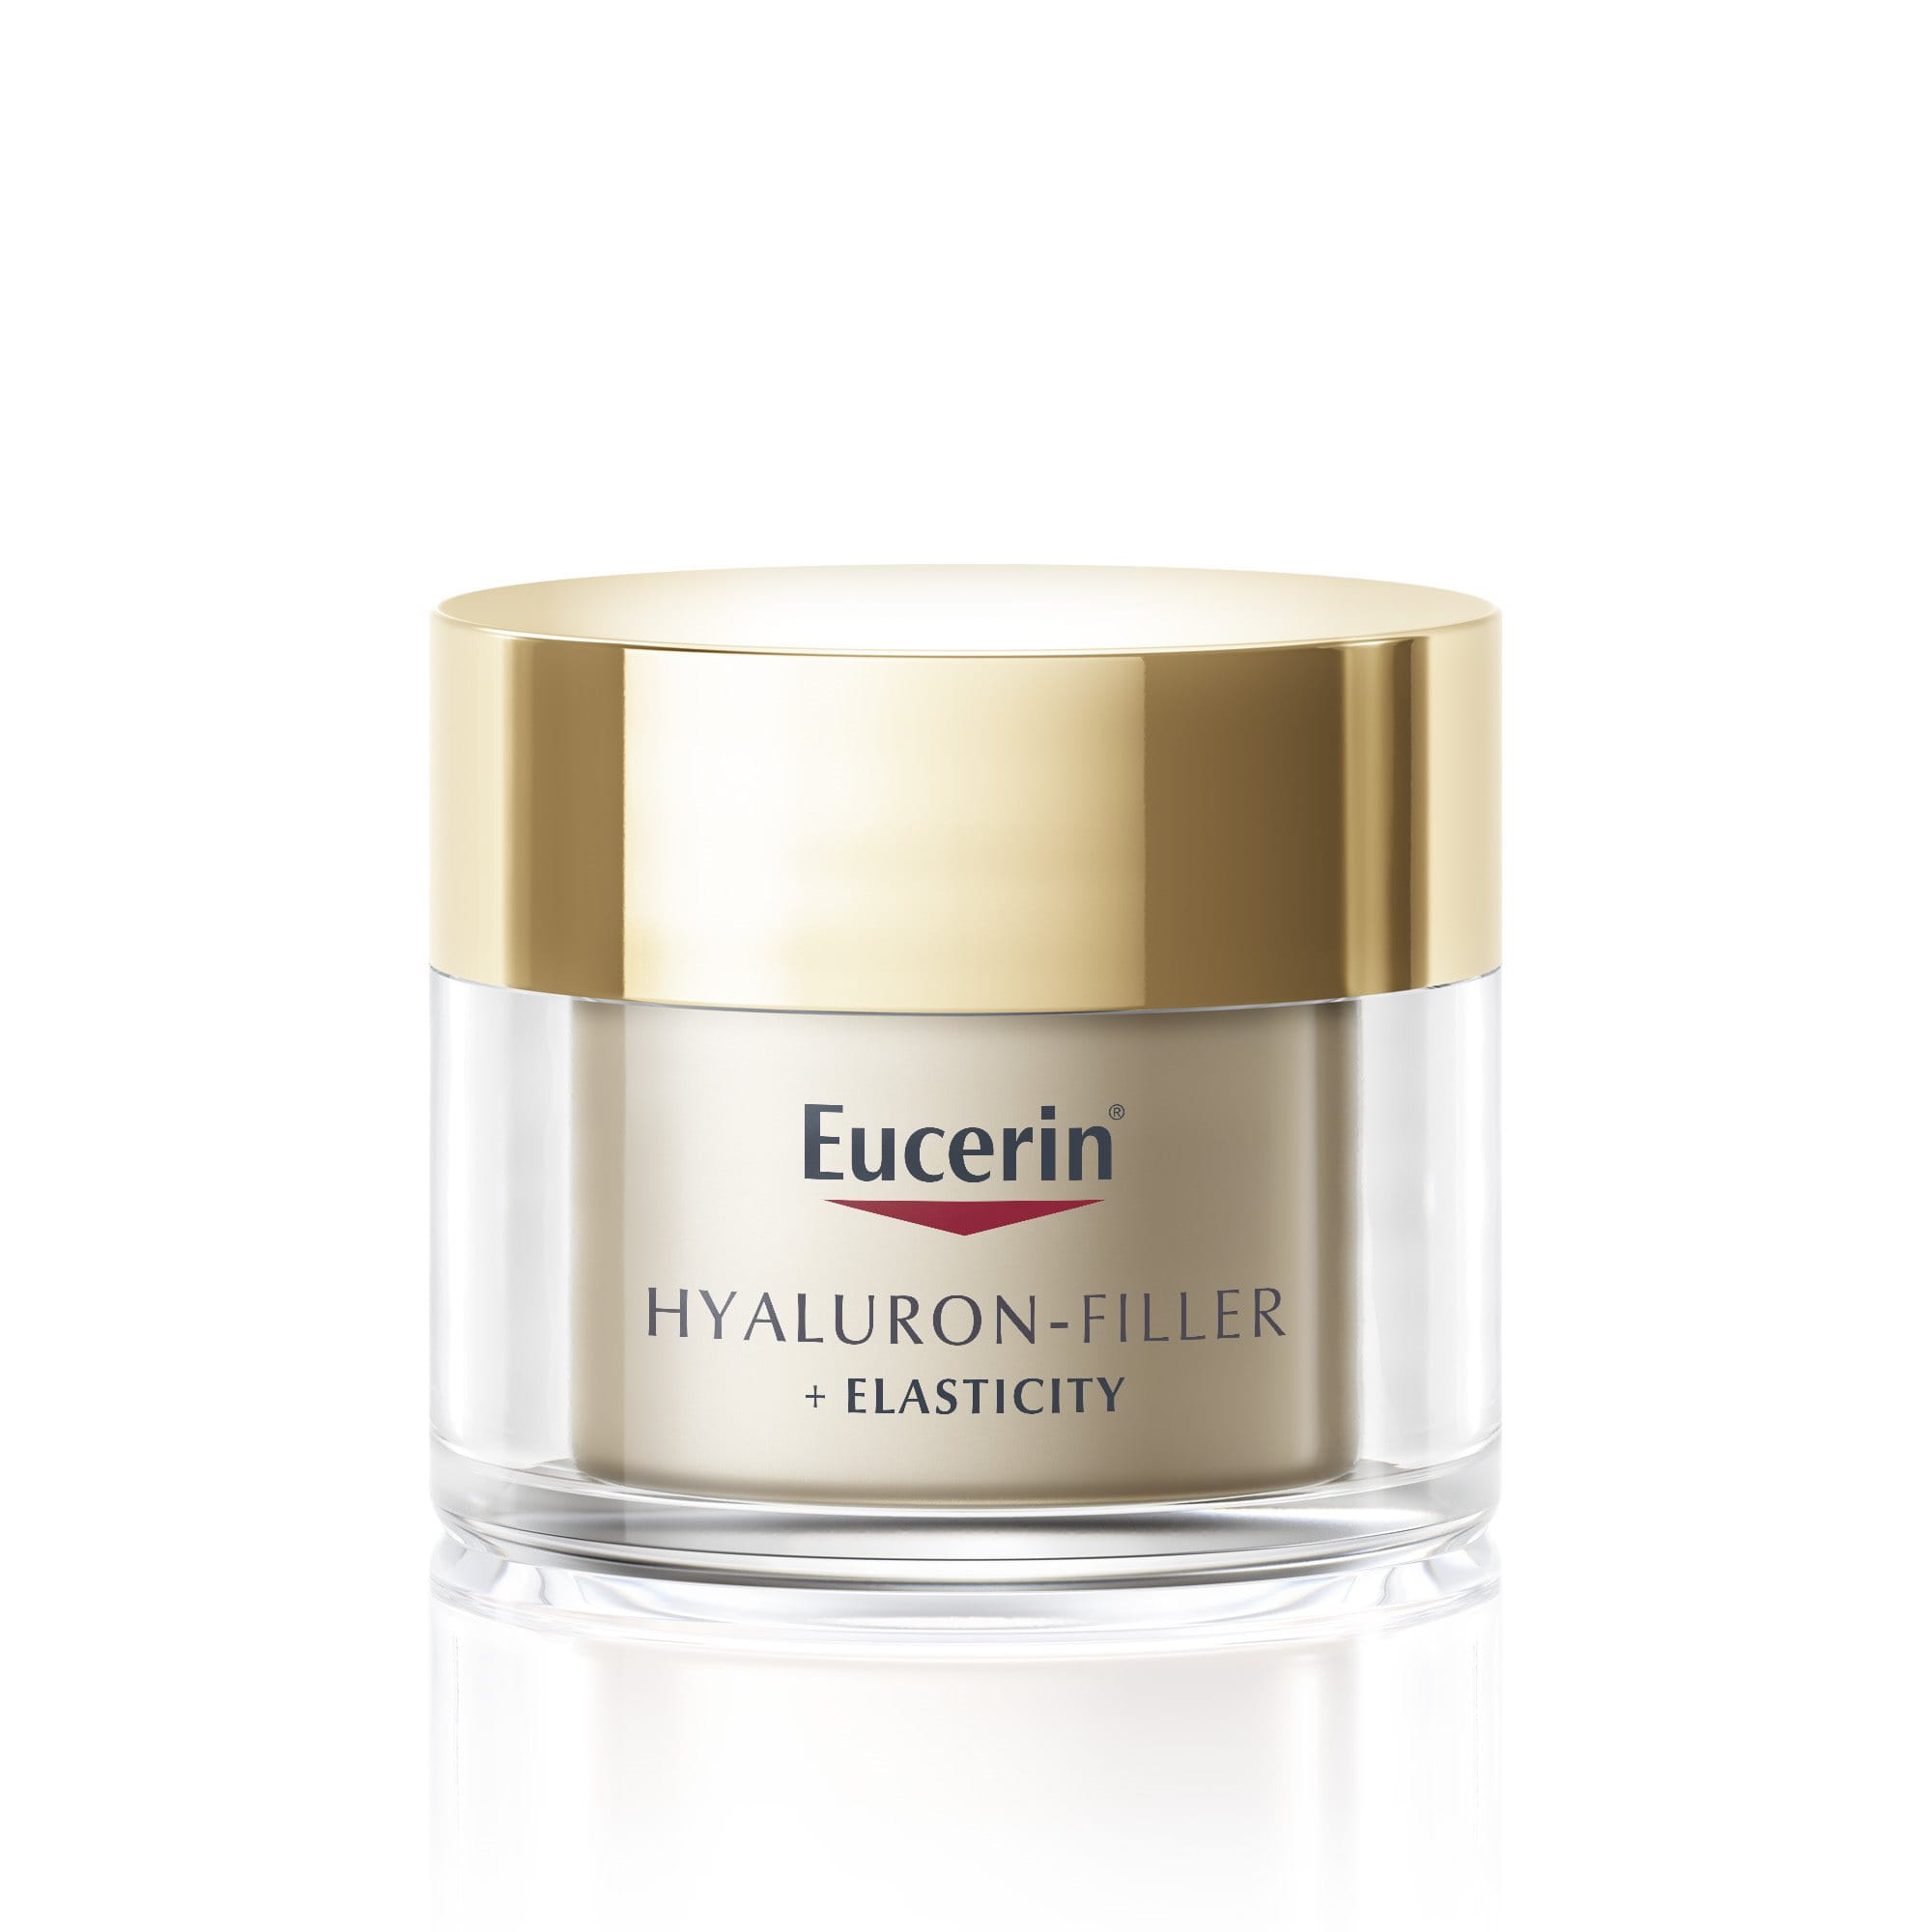 Eucerin Hyaluron-Filler + Elasticity Night Cream with patented Thiamidol